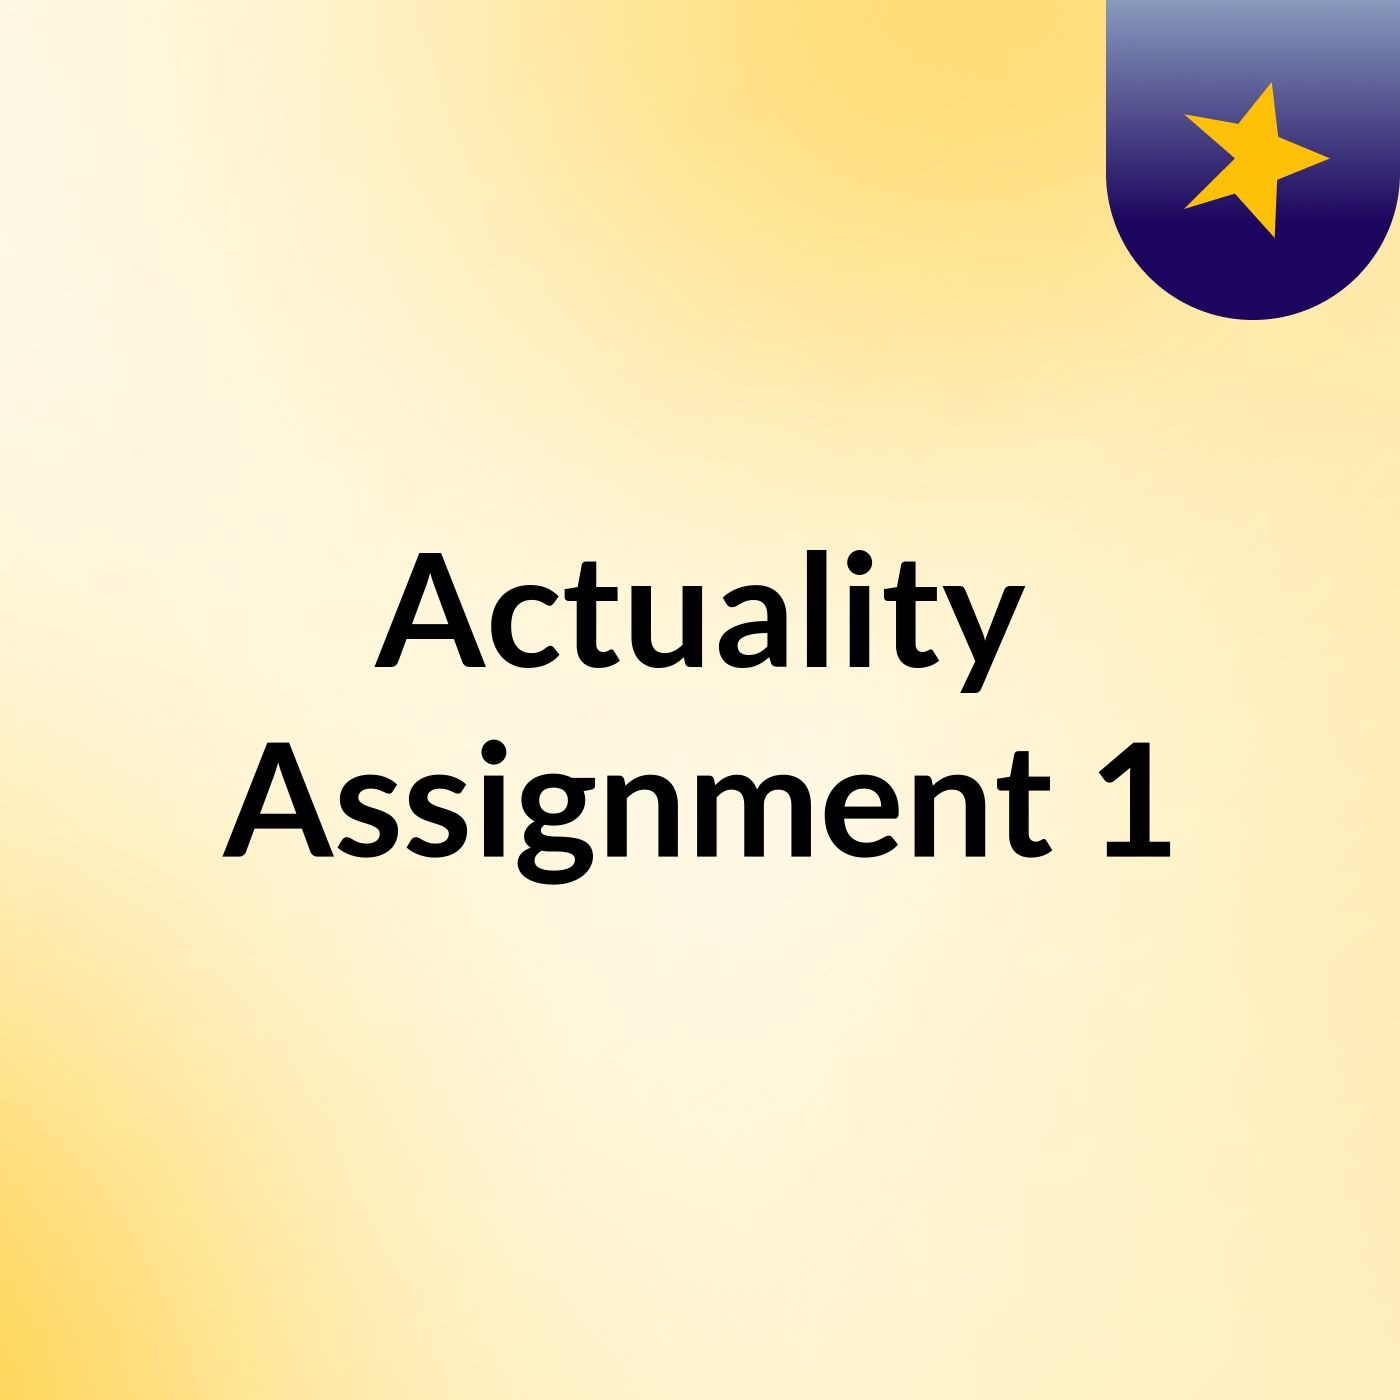 Episode 13 - Actuality Assignment 1